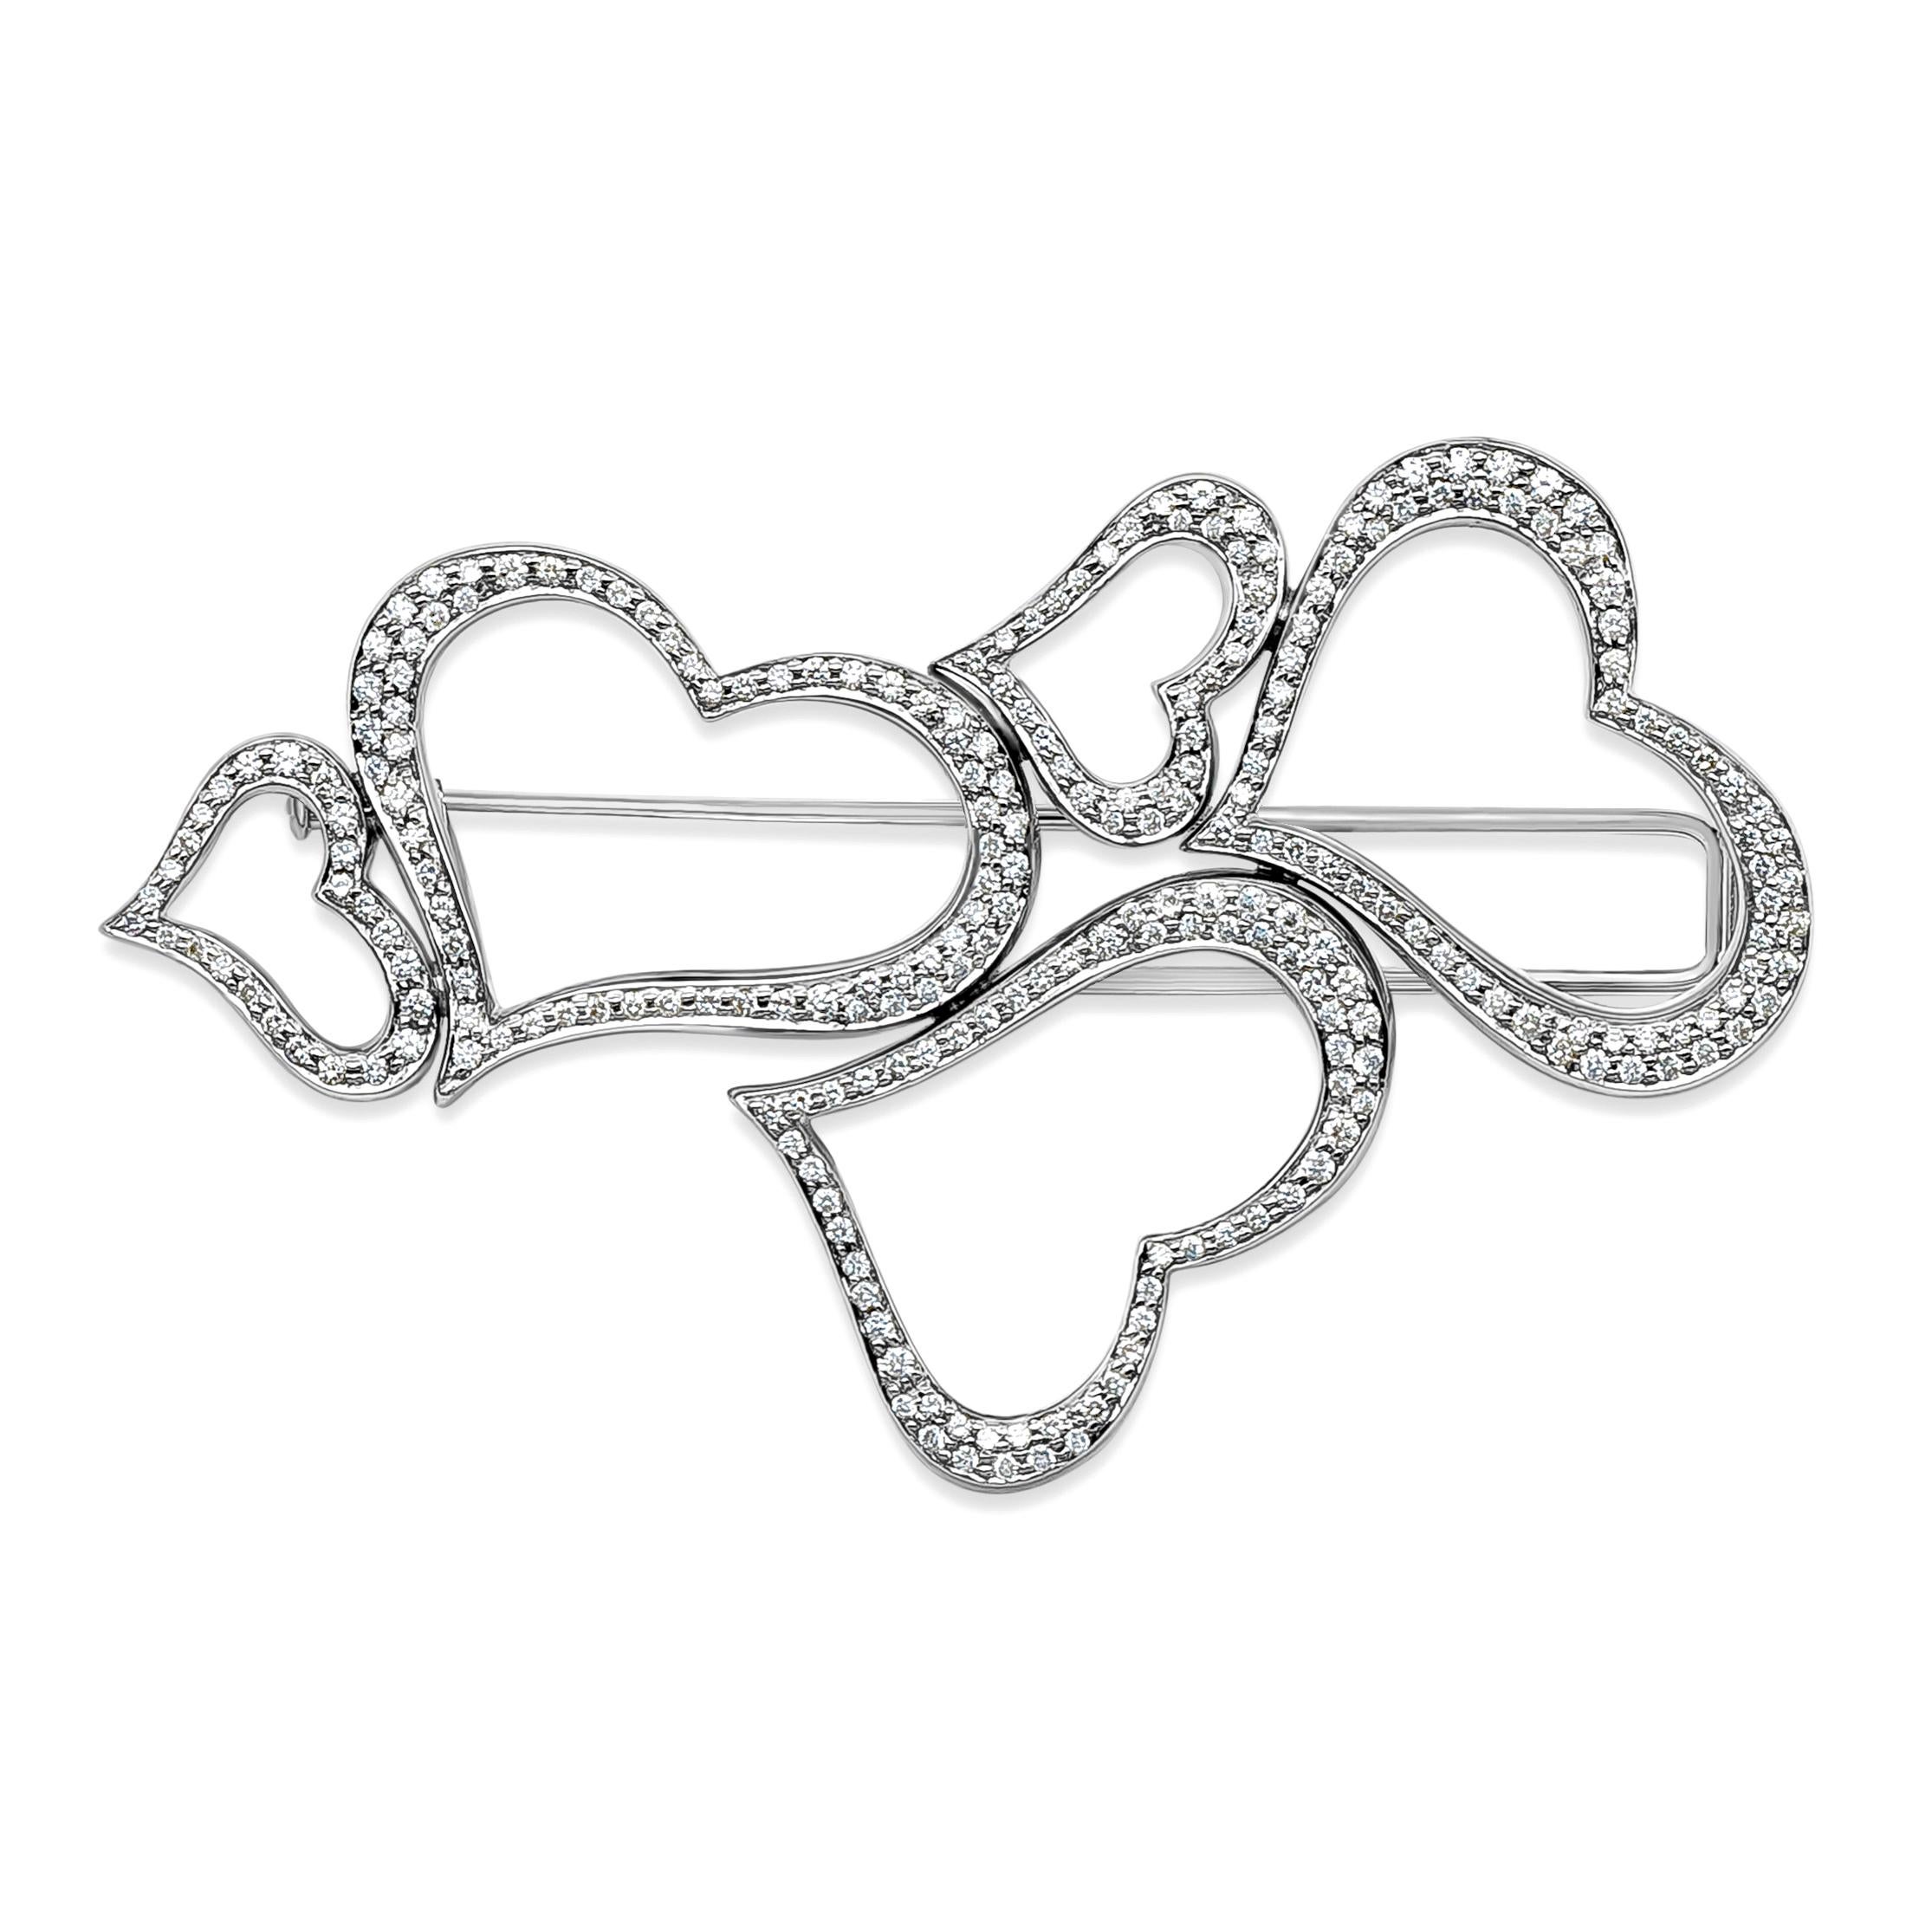 This unique and classic heart brooch showcasing 2.30 carat total brilliant round shape diamond, DEF in color and VVS+ in clarity. Beautifully set in a open-work heart design and Made with 18K White Gold. 3.10 inches in length and 1.80 inches in